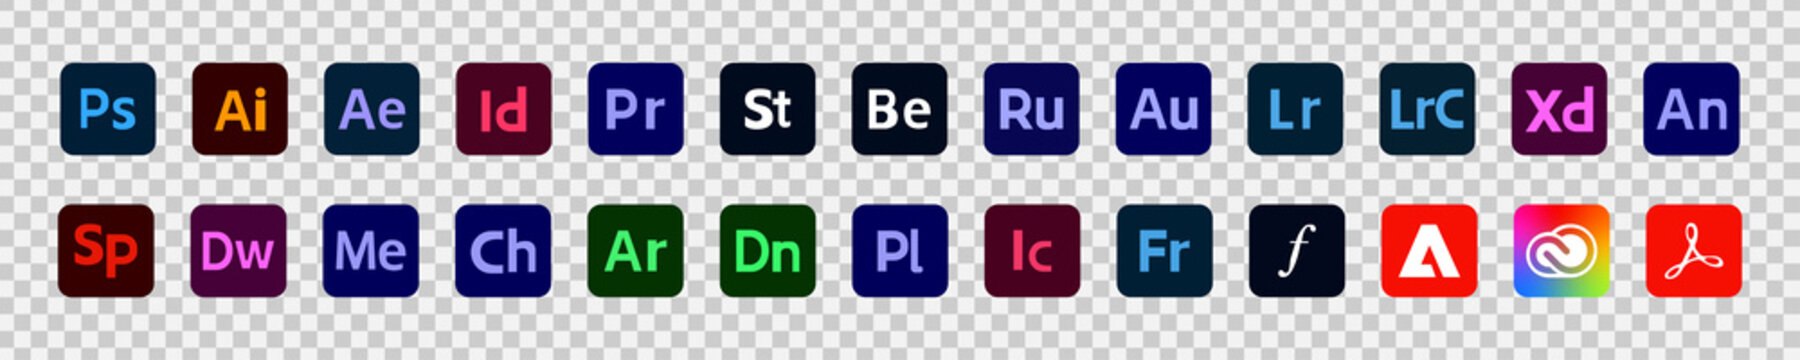 Adobe products. Icon set. Illustrator, Photoshop, After Effects, InDesign, Premiere Pro and others. Vector illustration. VINNYTSIA, UKRAINE - JULY 7, 2022